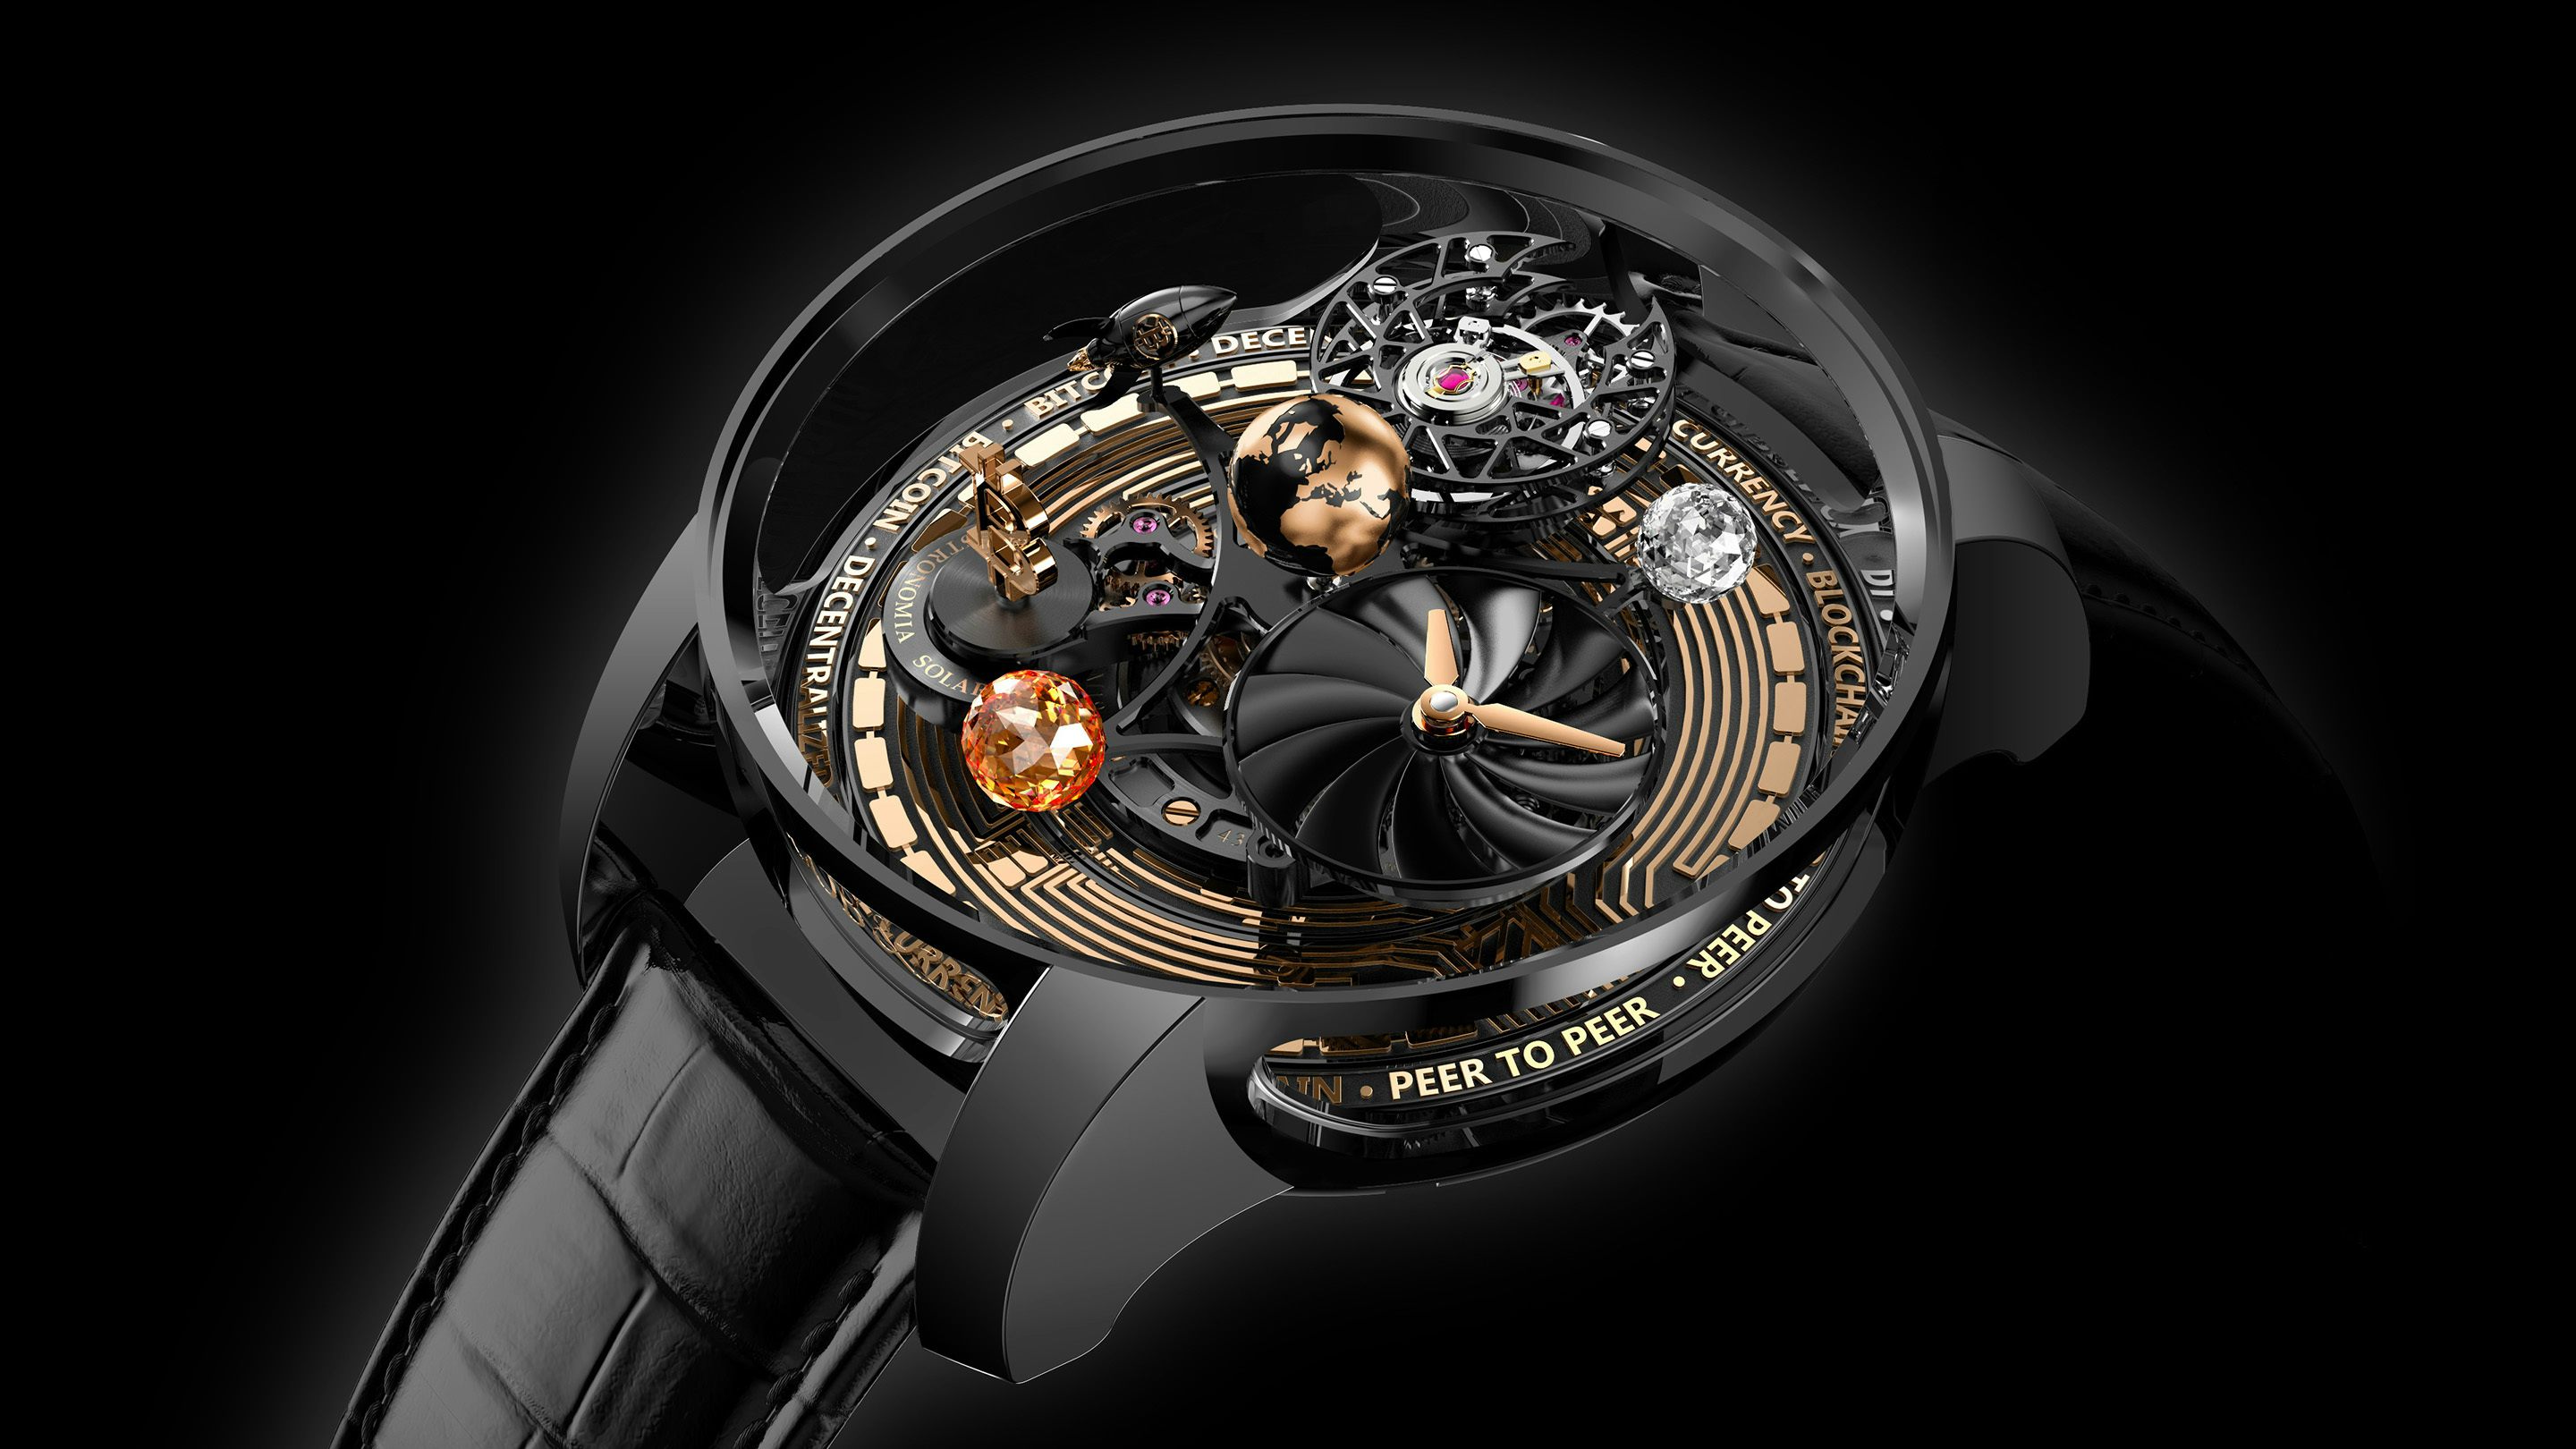 Place Your Bets With The Jacob & Co Casino Tourbillon